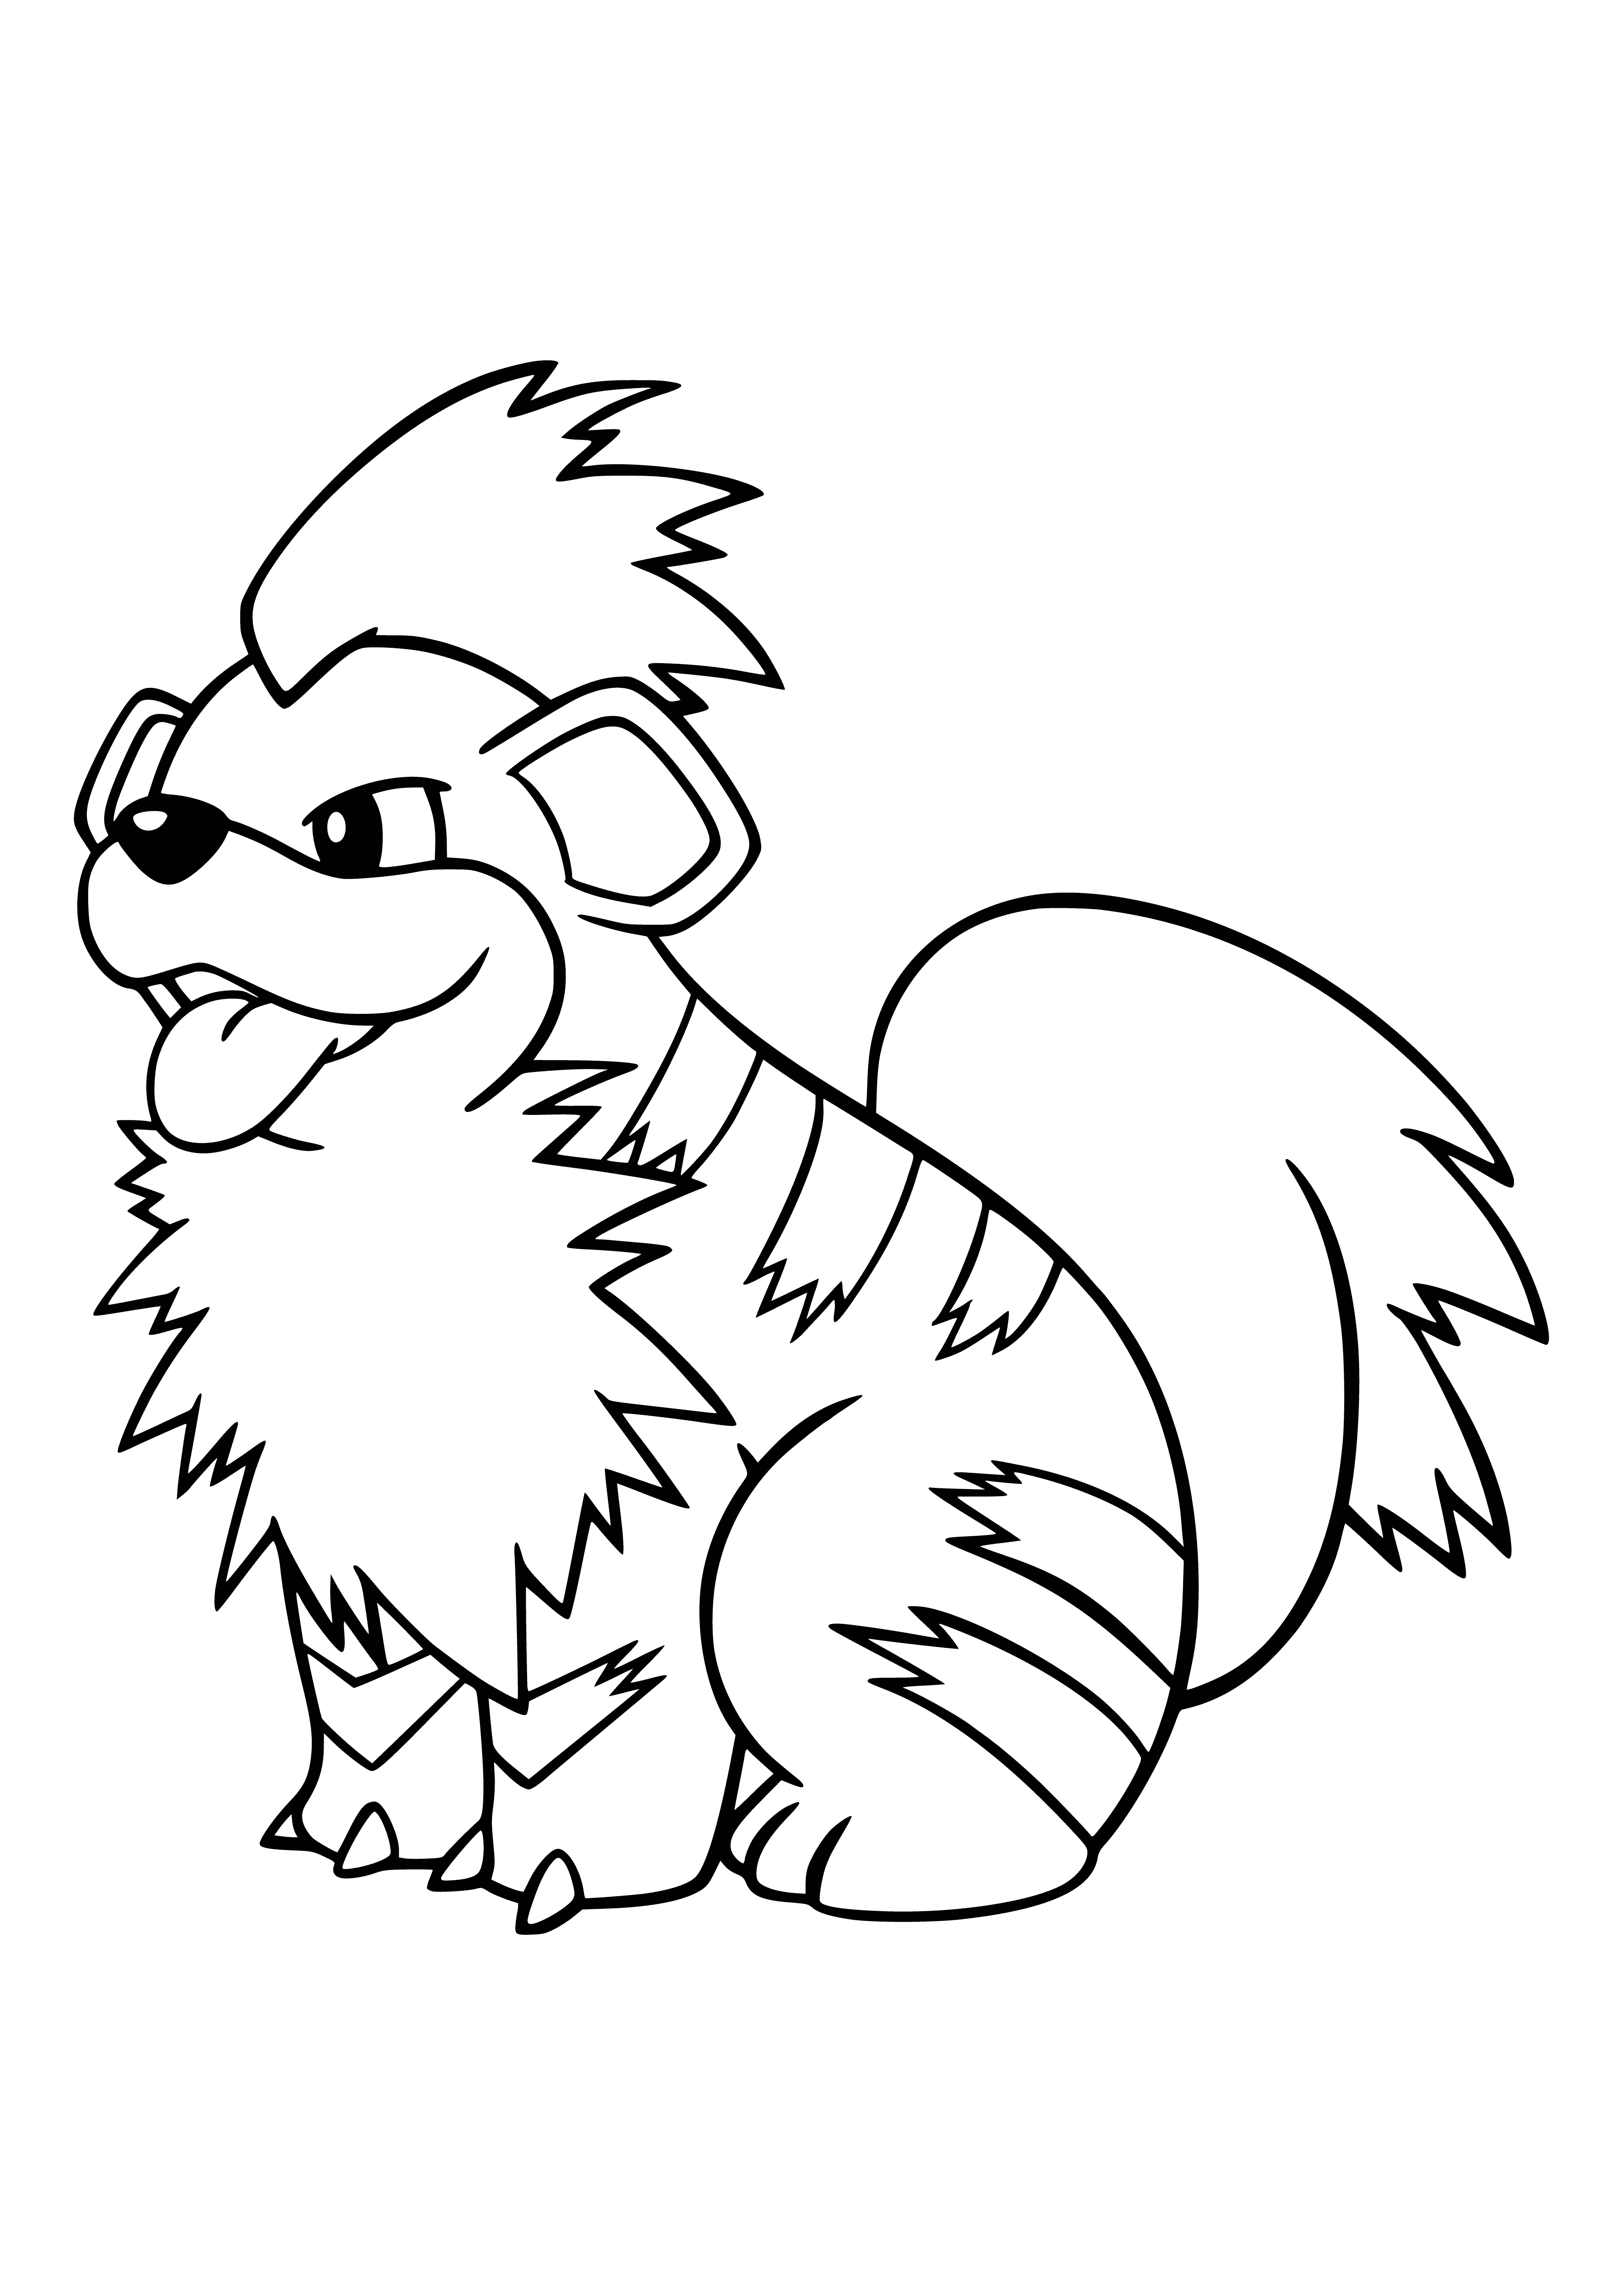 Pokemon Groulit (Growlithe) coloring page